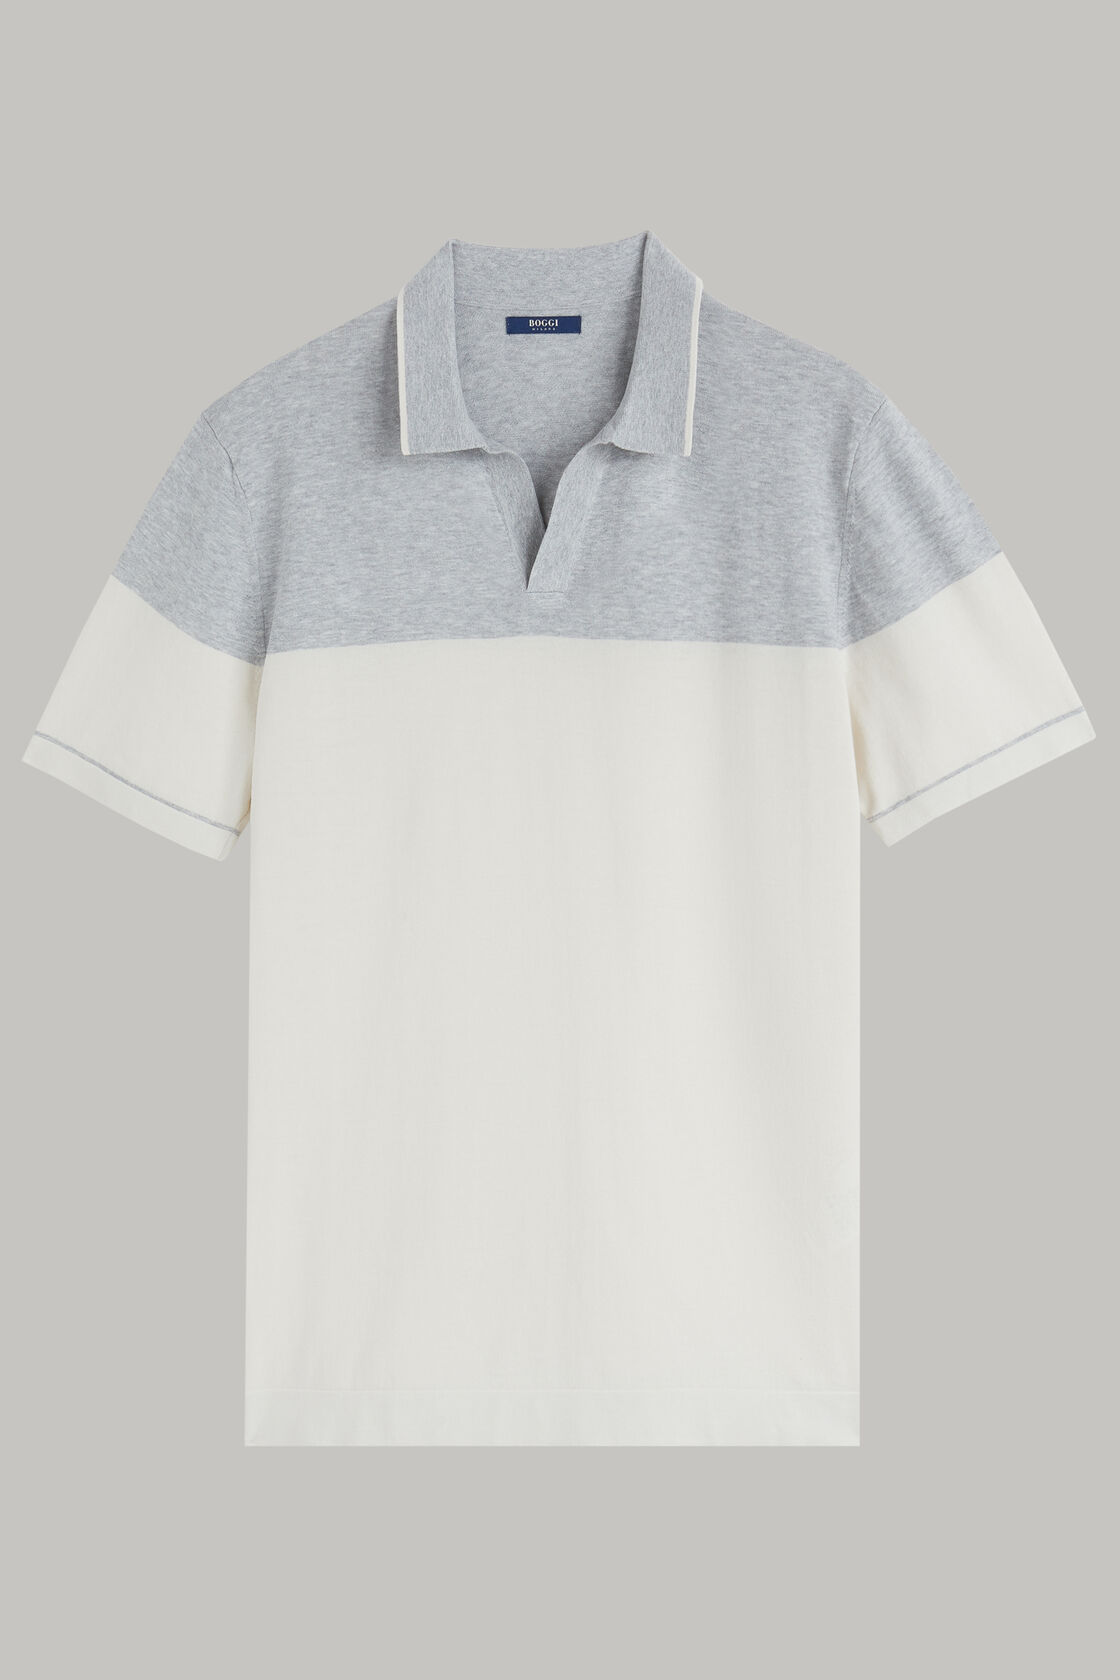 White and grey polo shirt in cotton crepe knit | Boggi